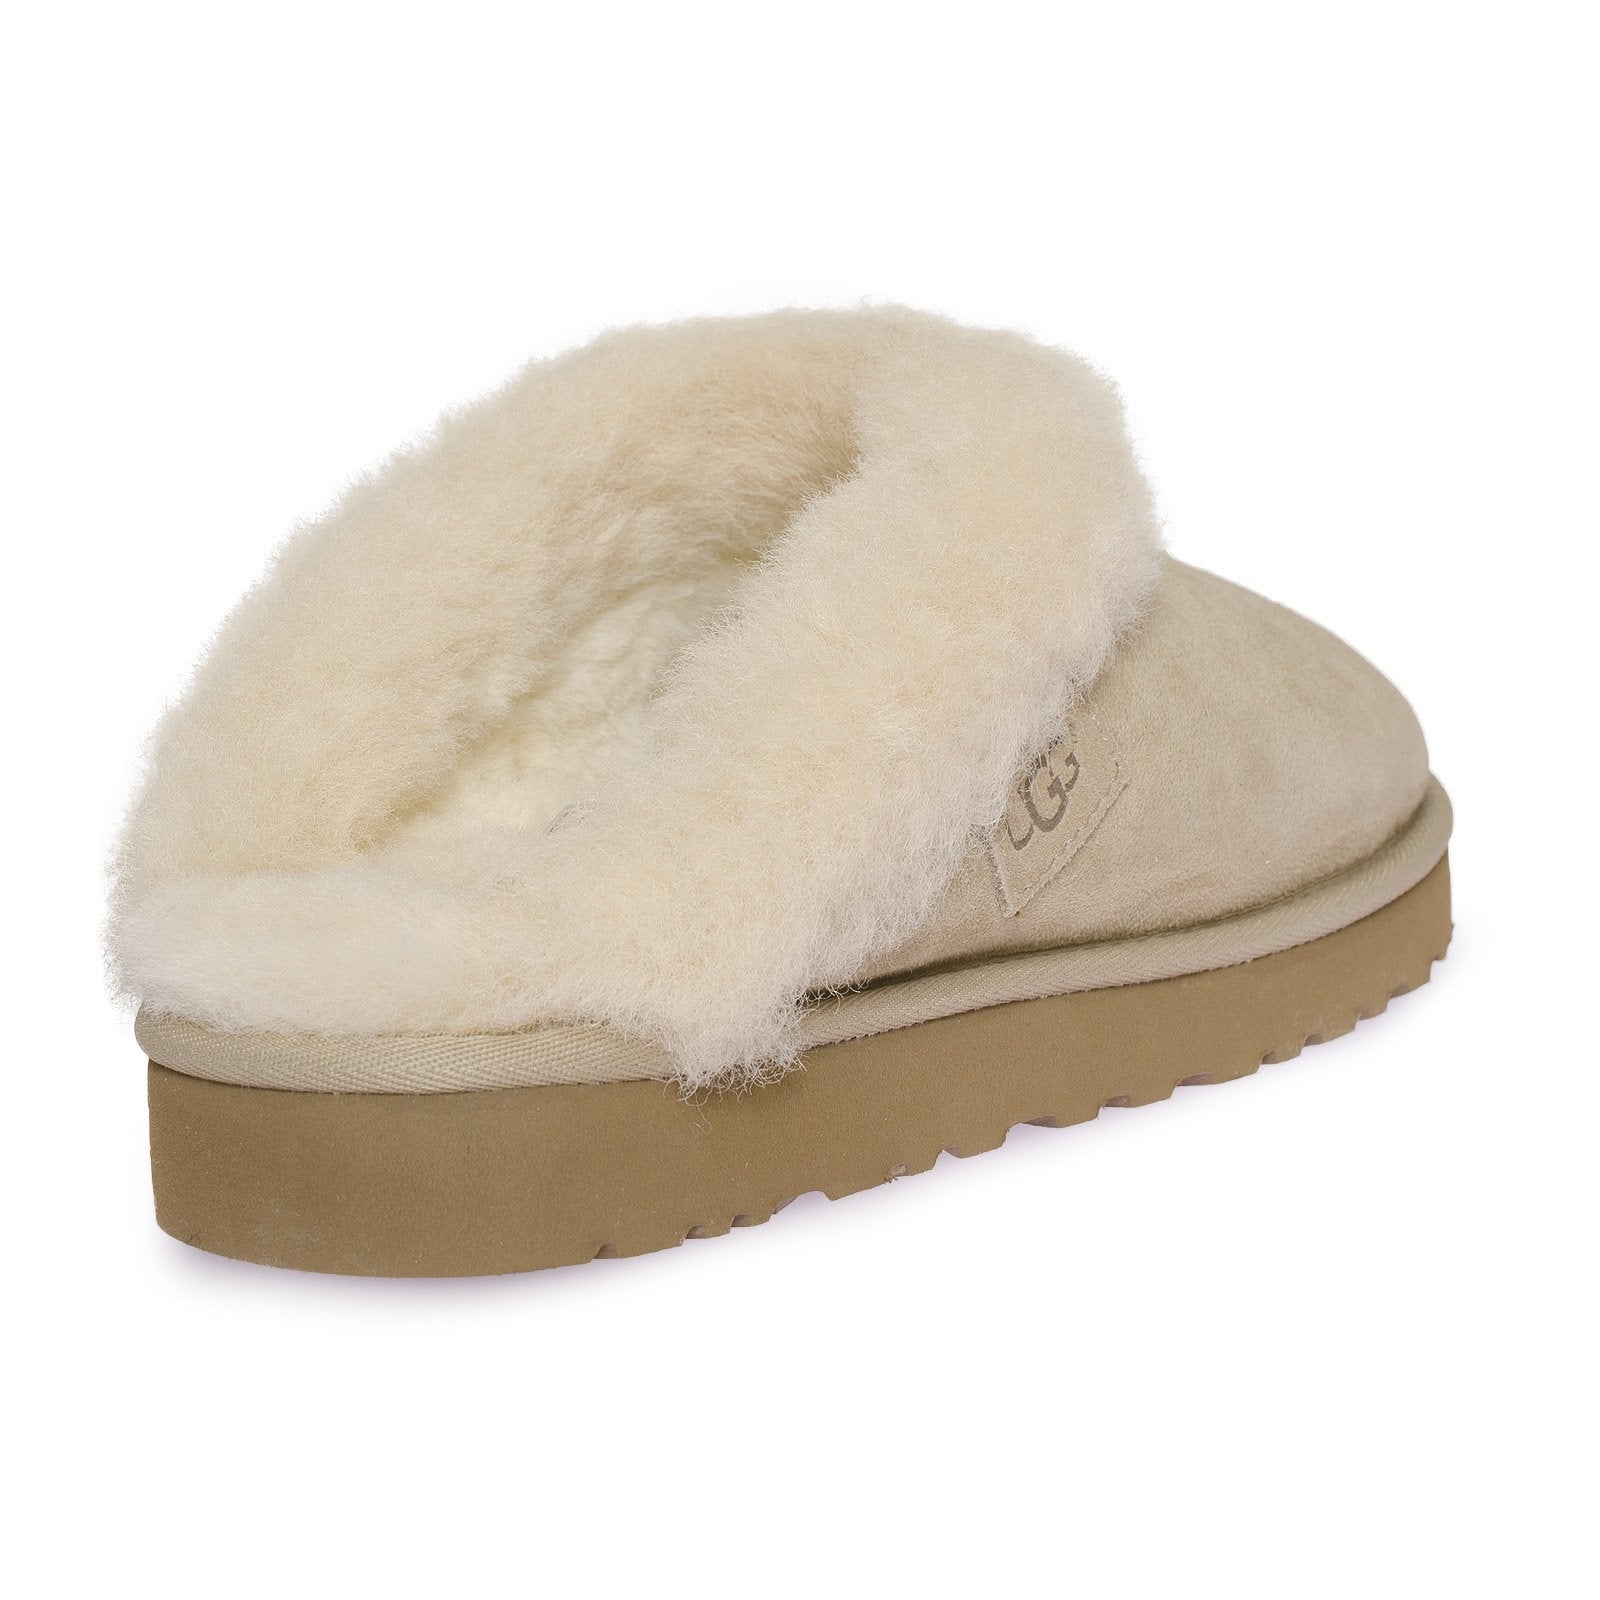 UGG Cluggette Sand Slippers - Women's - MyCozyBoots